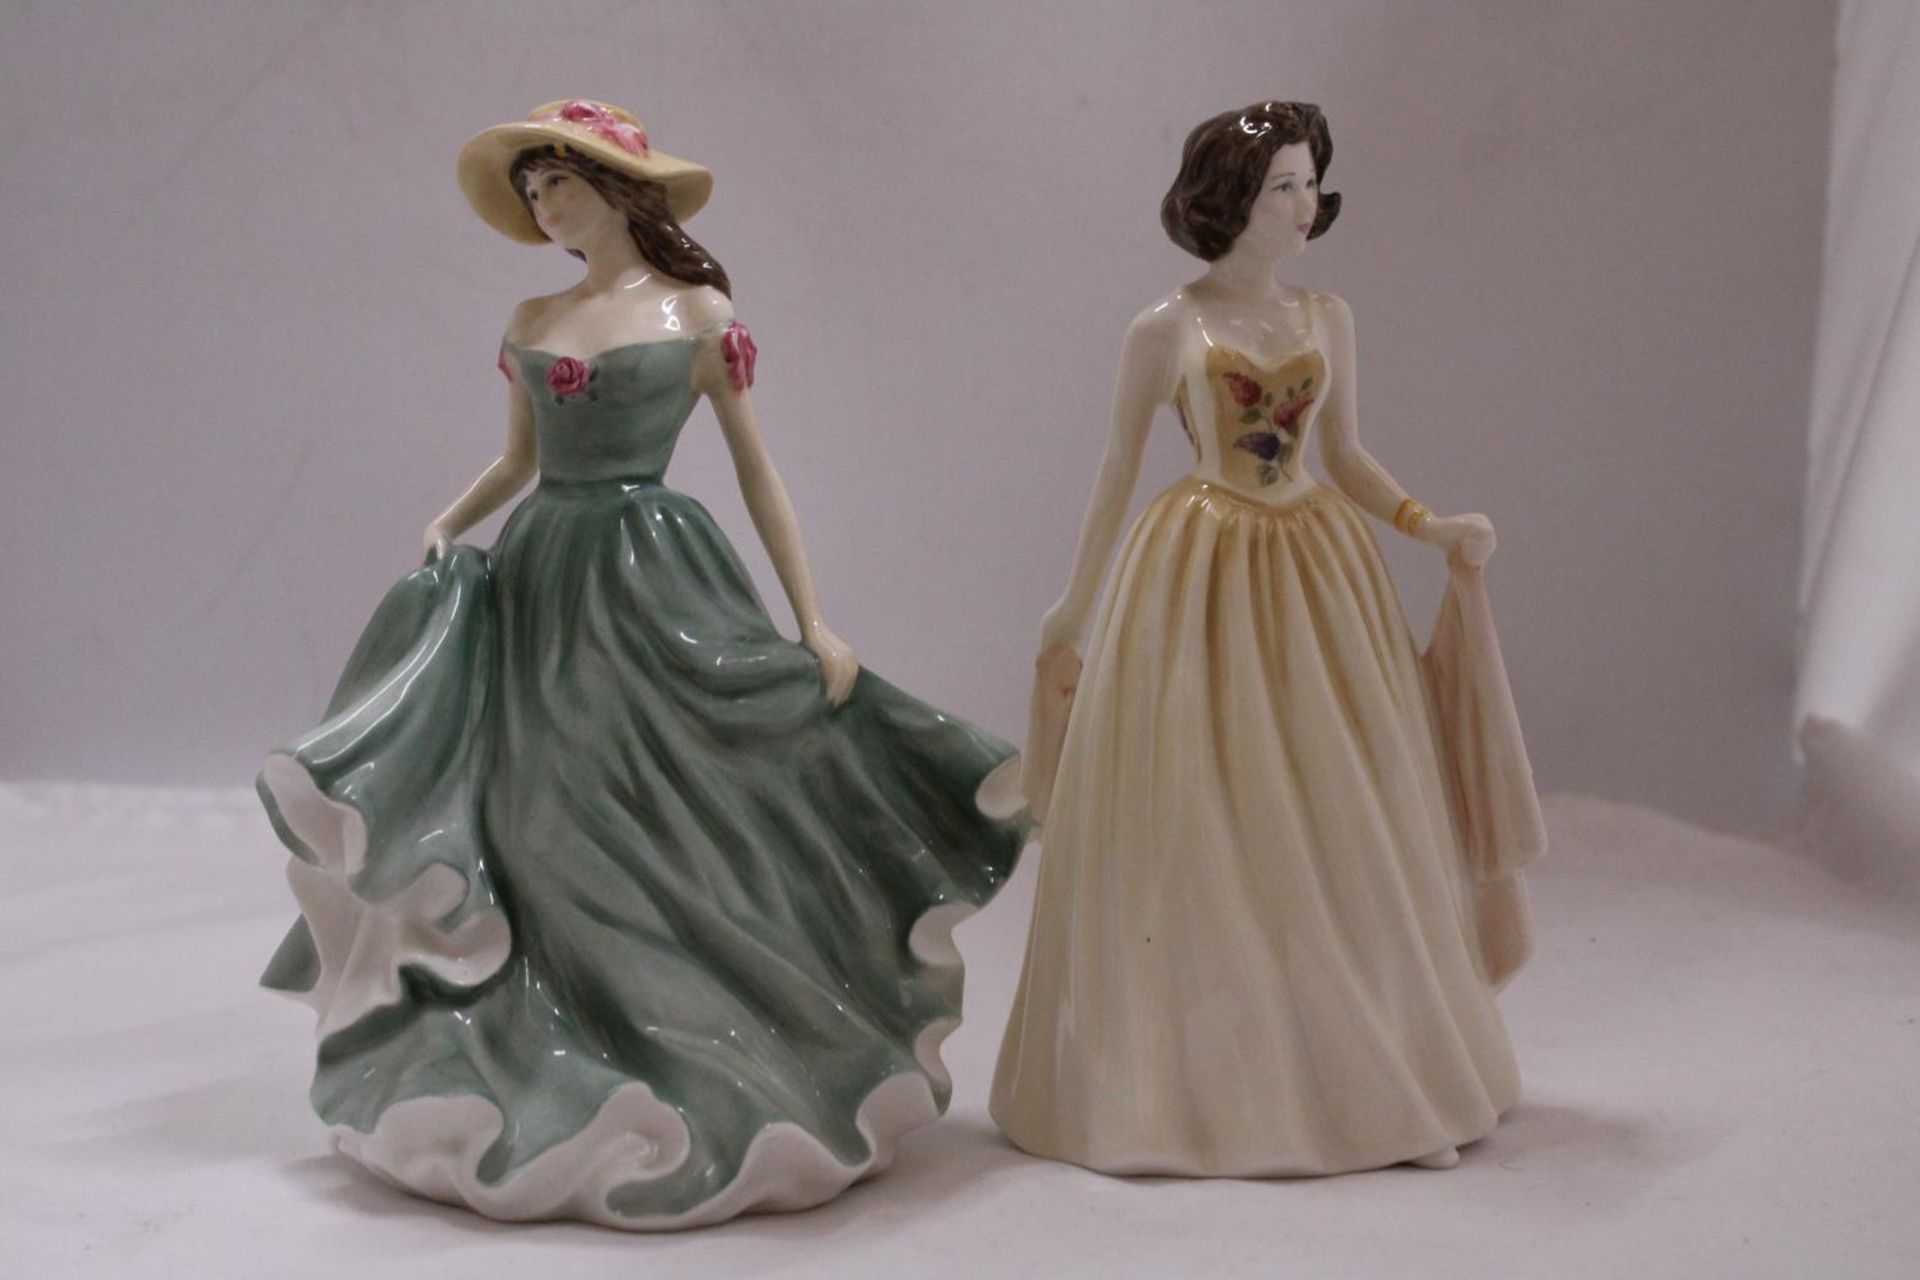 TWO ROYAL DOULTON FIGURINES TO INCLUDE "BEST WISHES" HN3971 AND "JENNIFER" HN4248 - Image 2 of 5